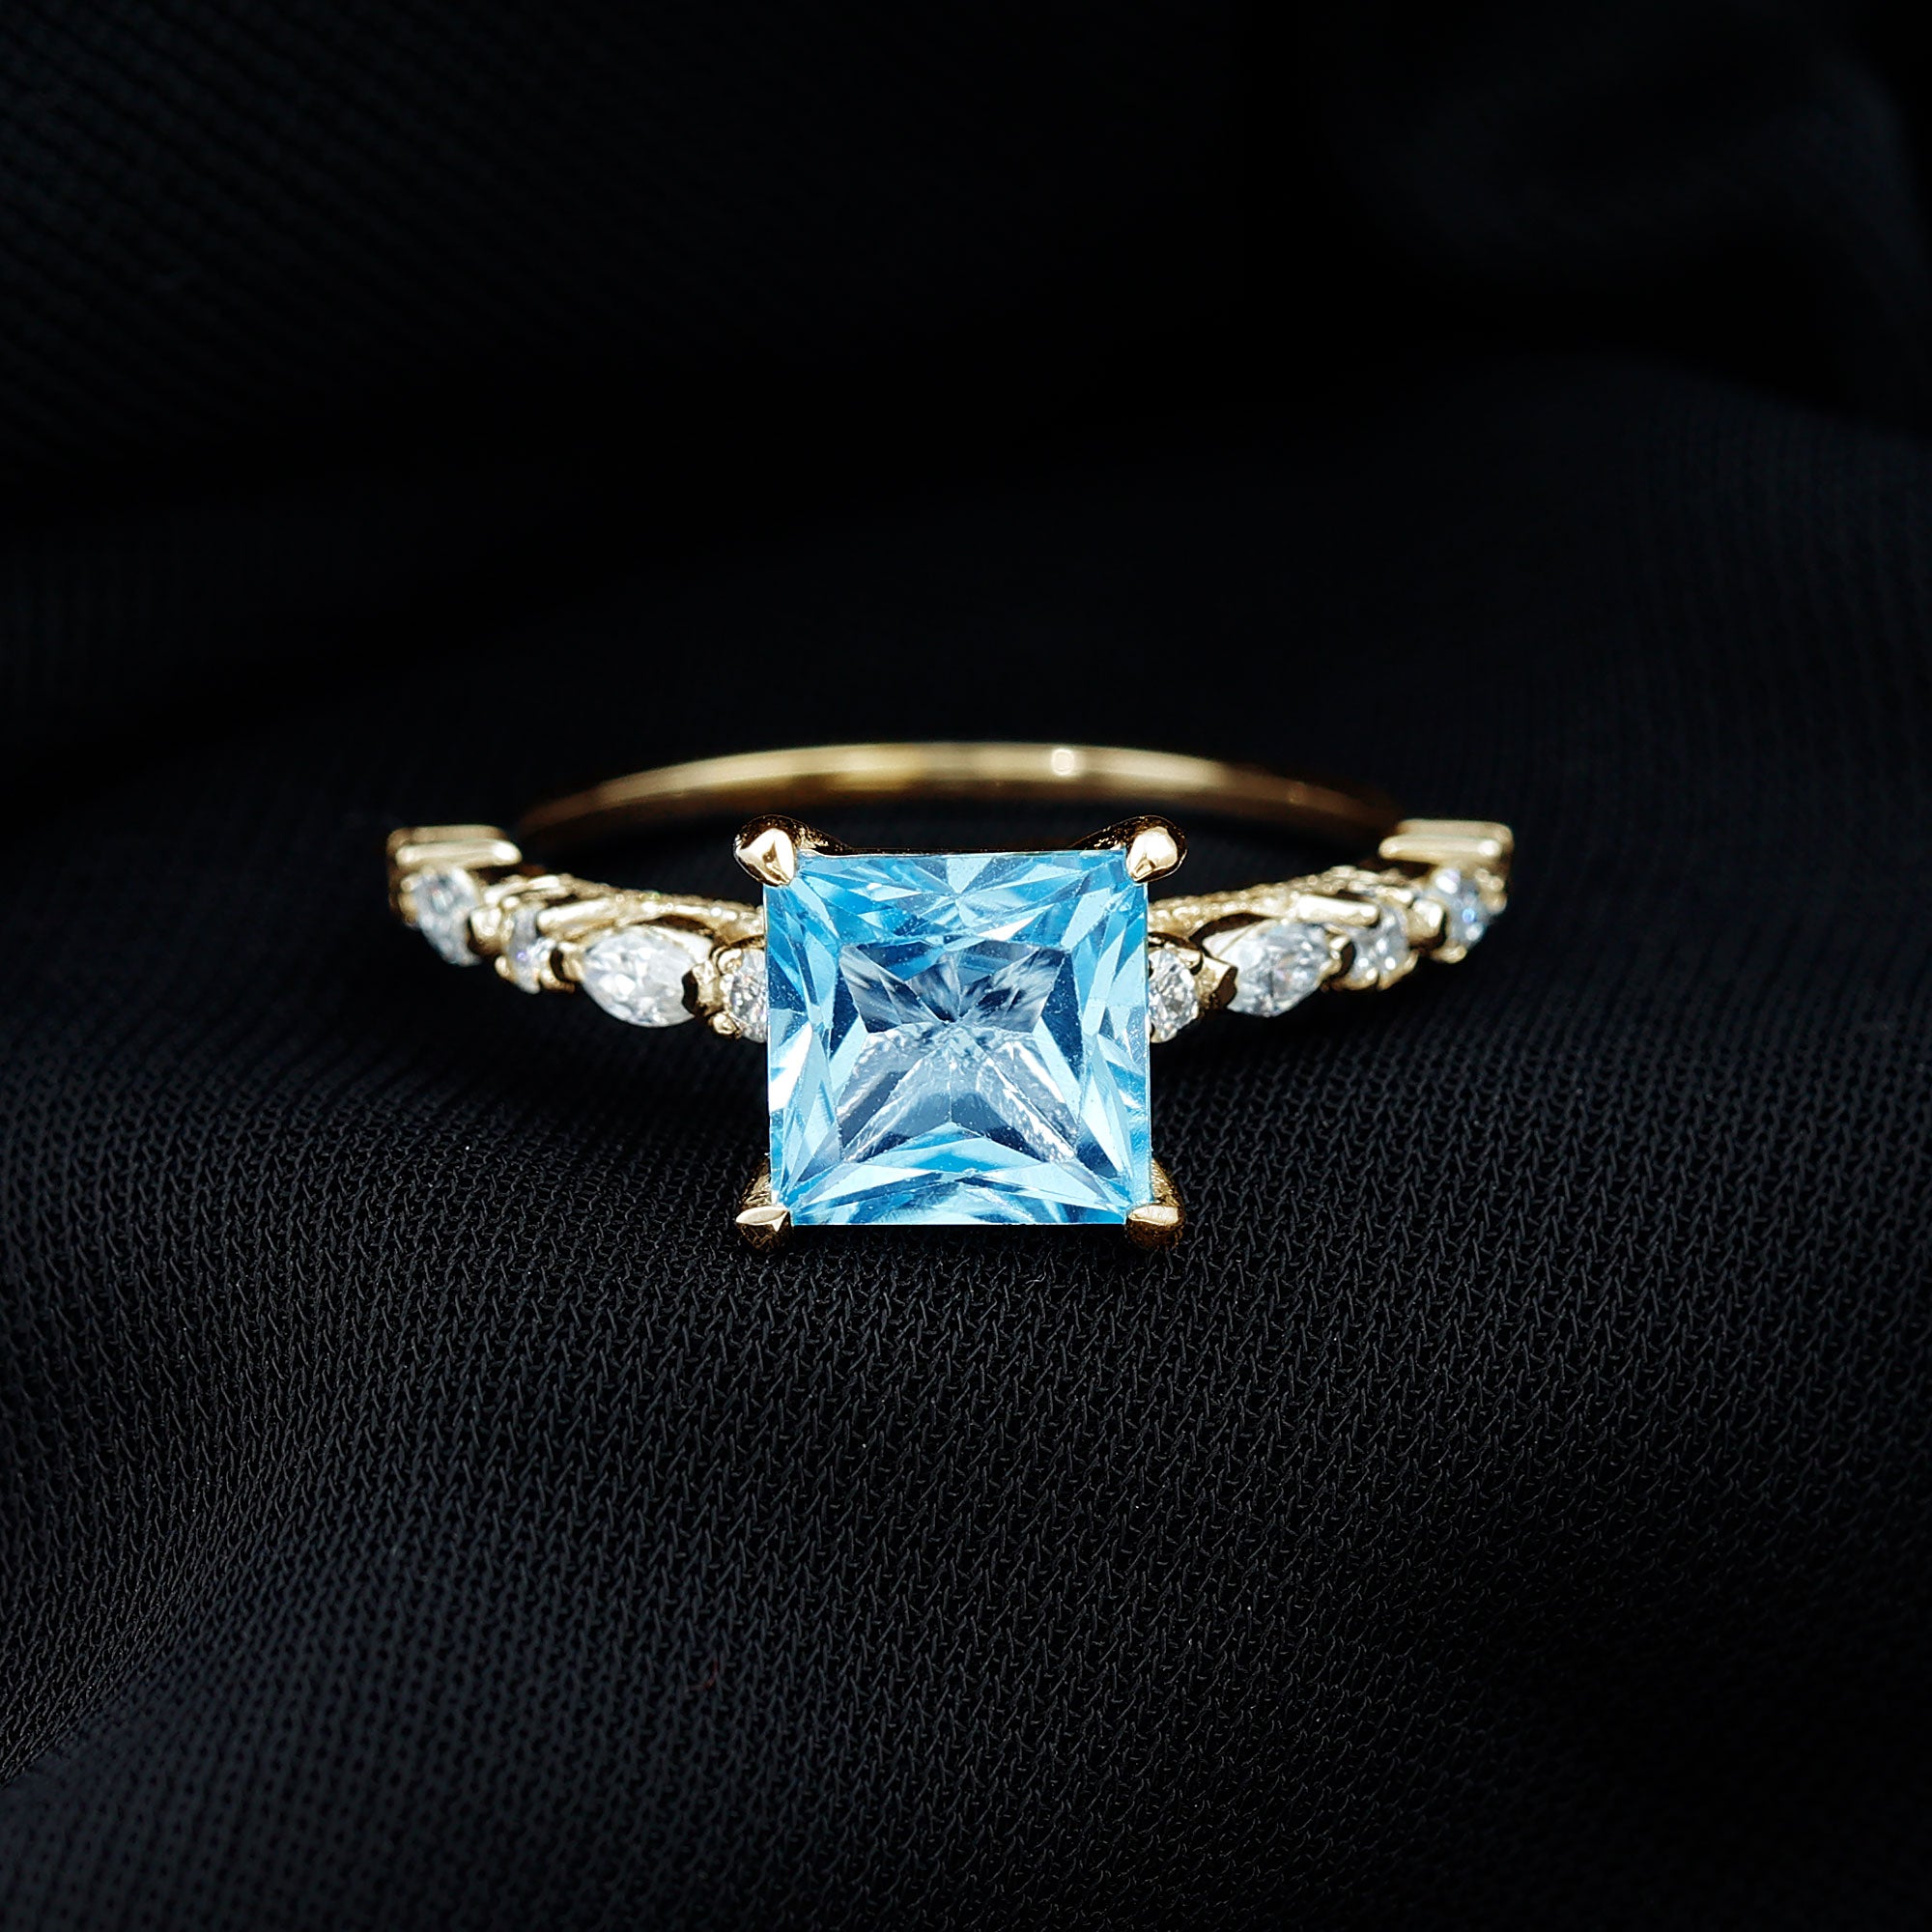 Princess Cut Sky Blue Topaz Solitaire Engagement Ring with Moissanite Sky Blue Topaz - ( AAA ) - Quality - Rosec Jewels